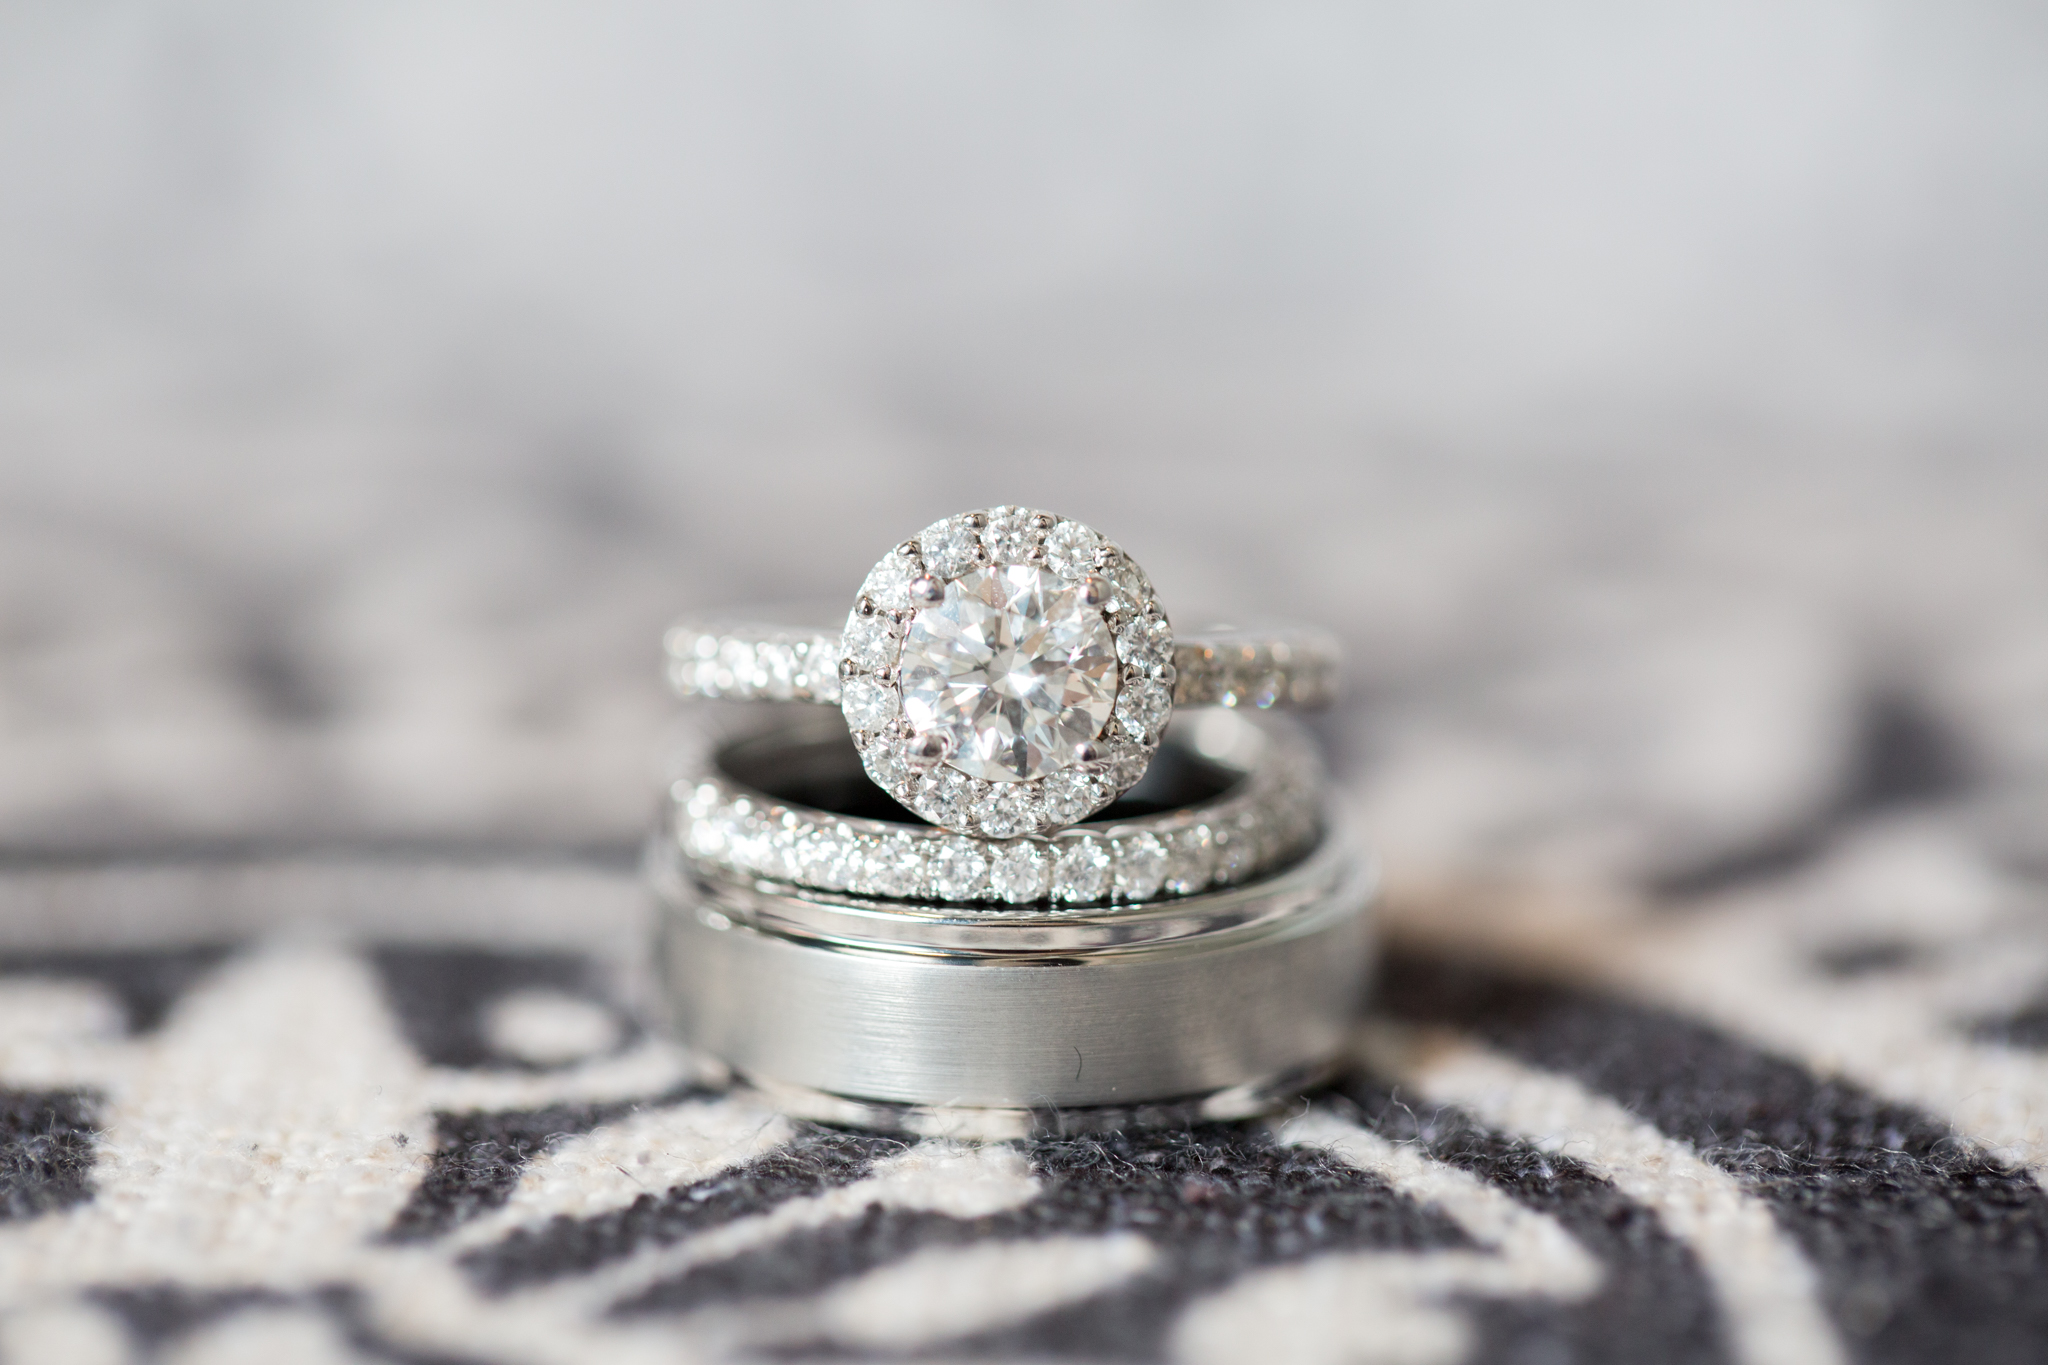 Cleaning Your Wedding Ring: Everything You Need to Know